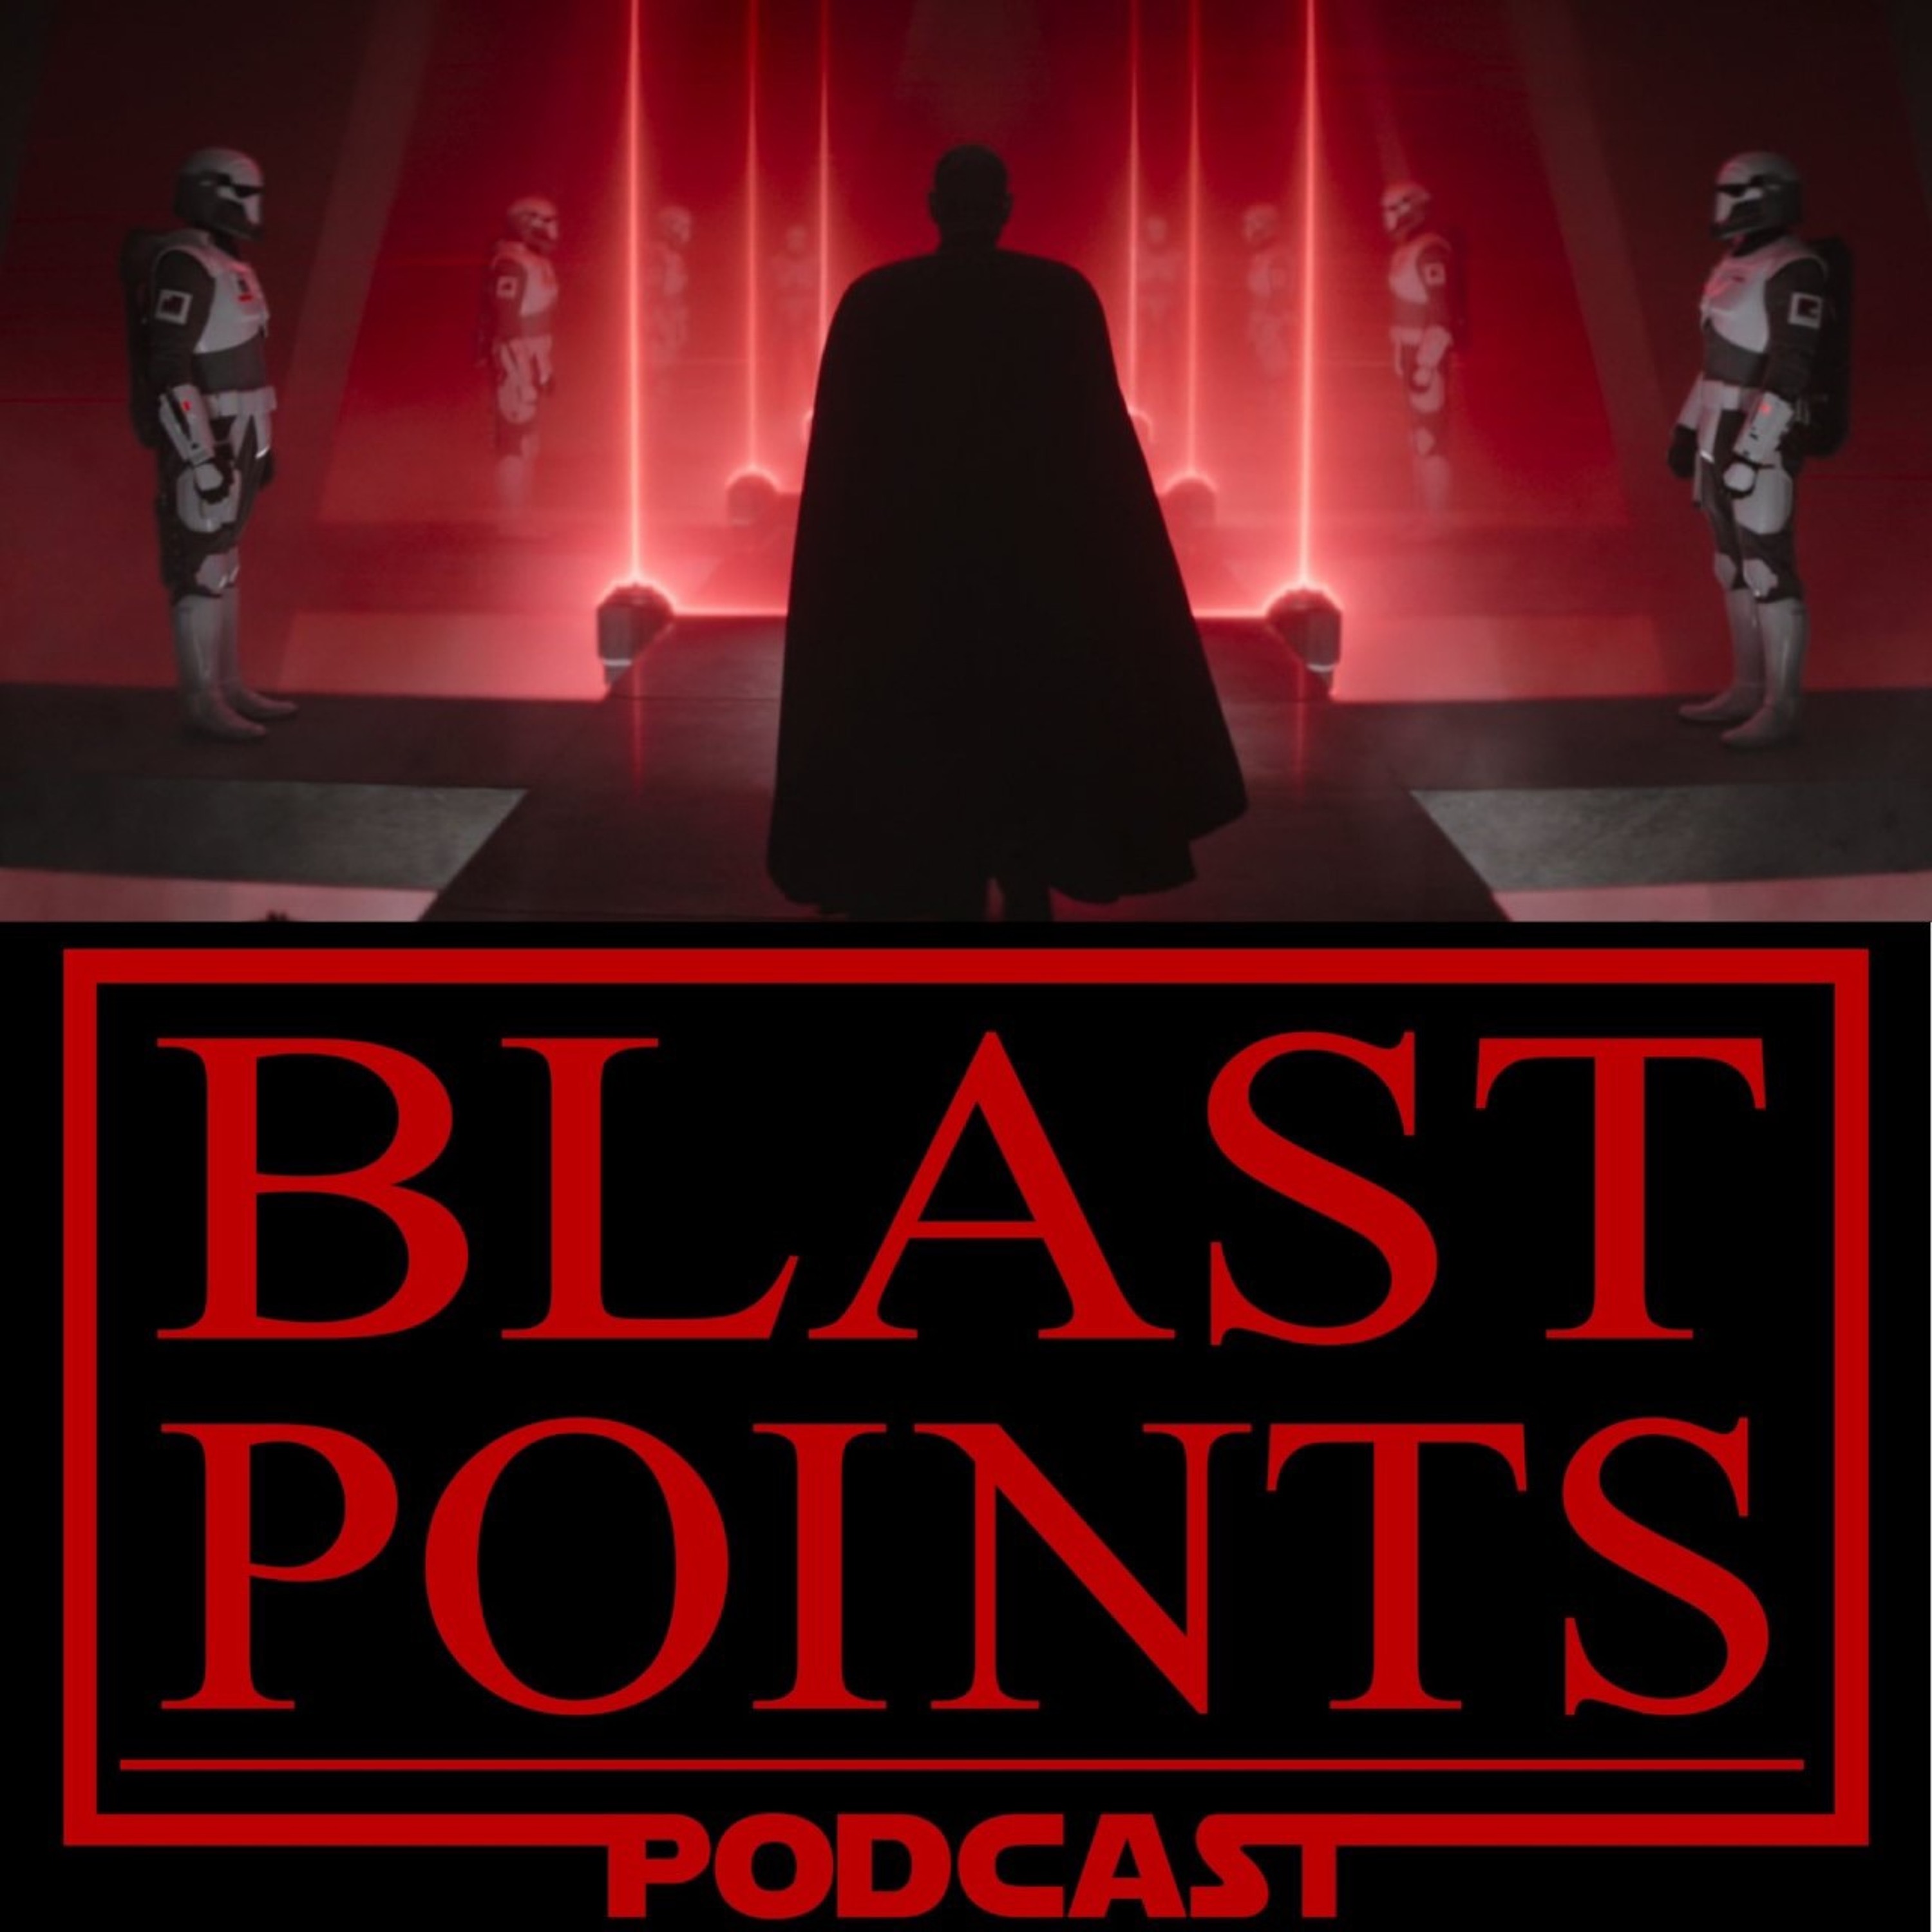 Episode 353 - The Mandalorian Chapter 23 ”The Spies” Freakout